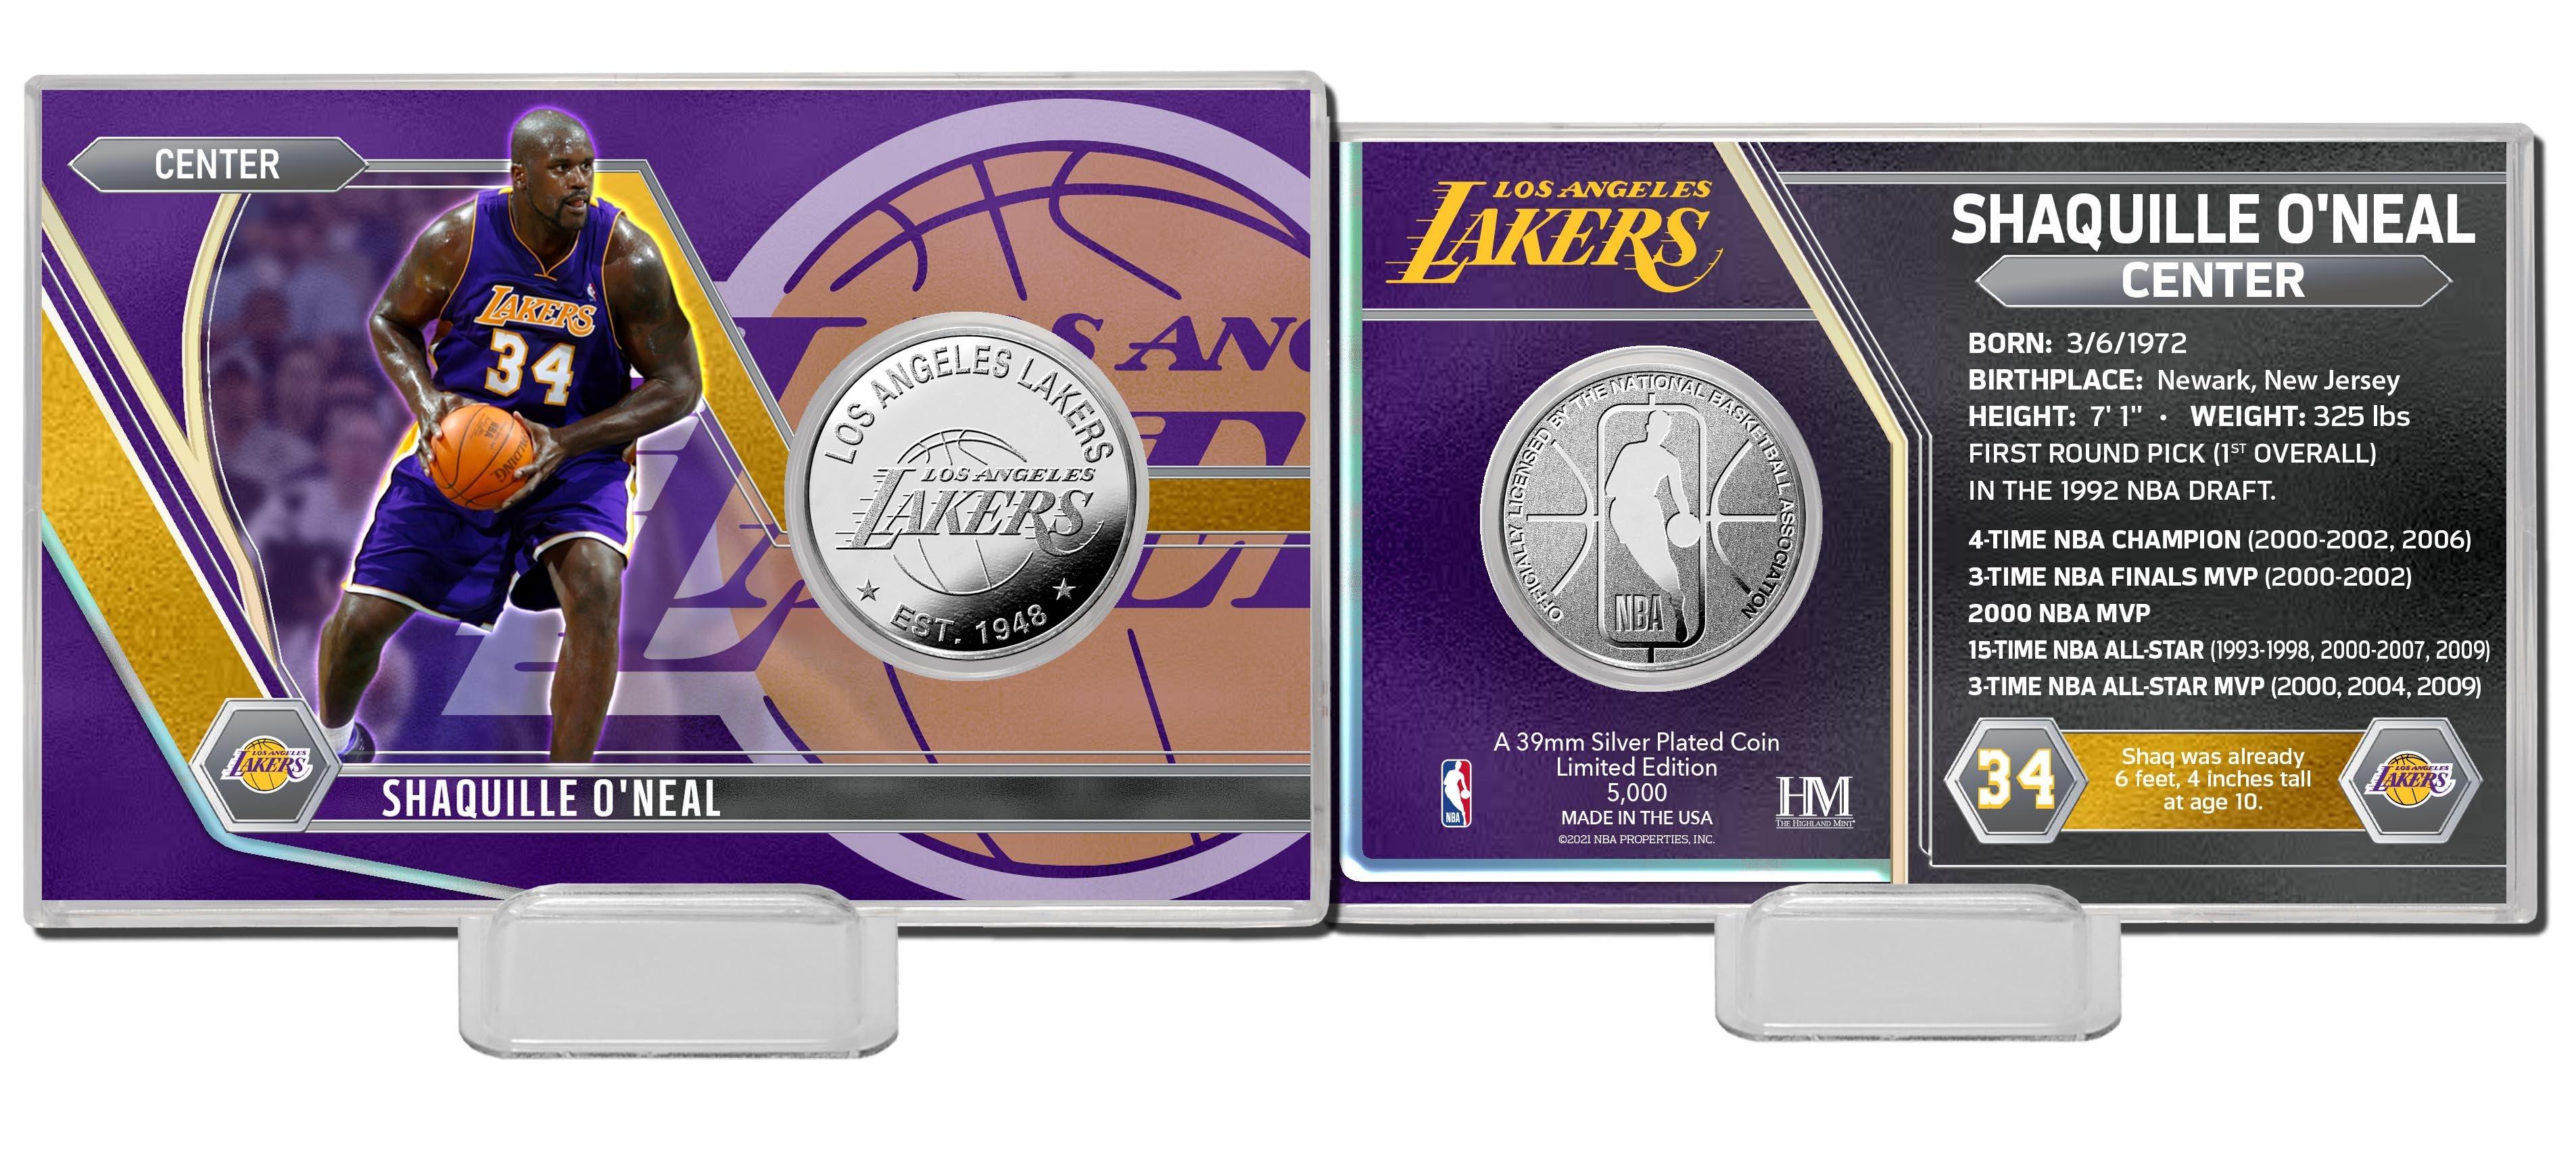 Lakers release new jerseys to commemorate championship - Silver